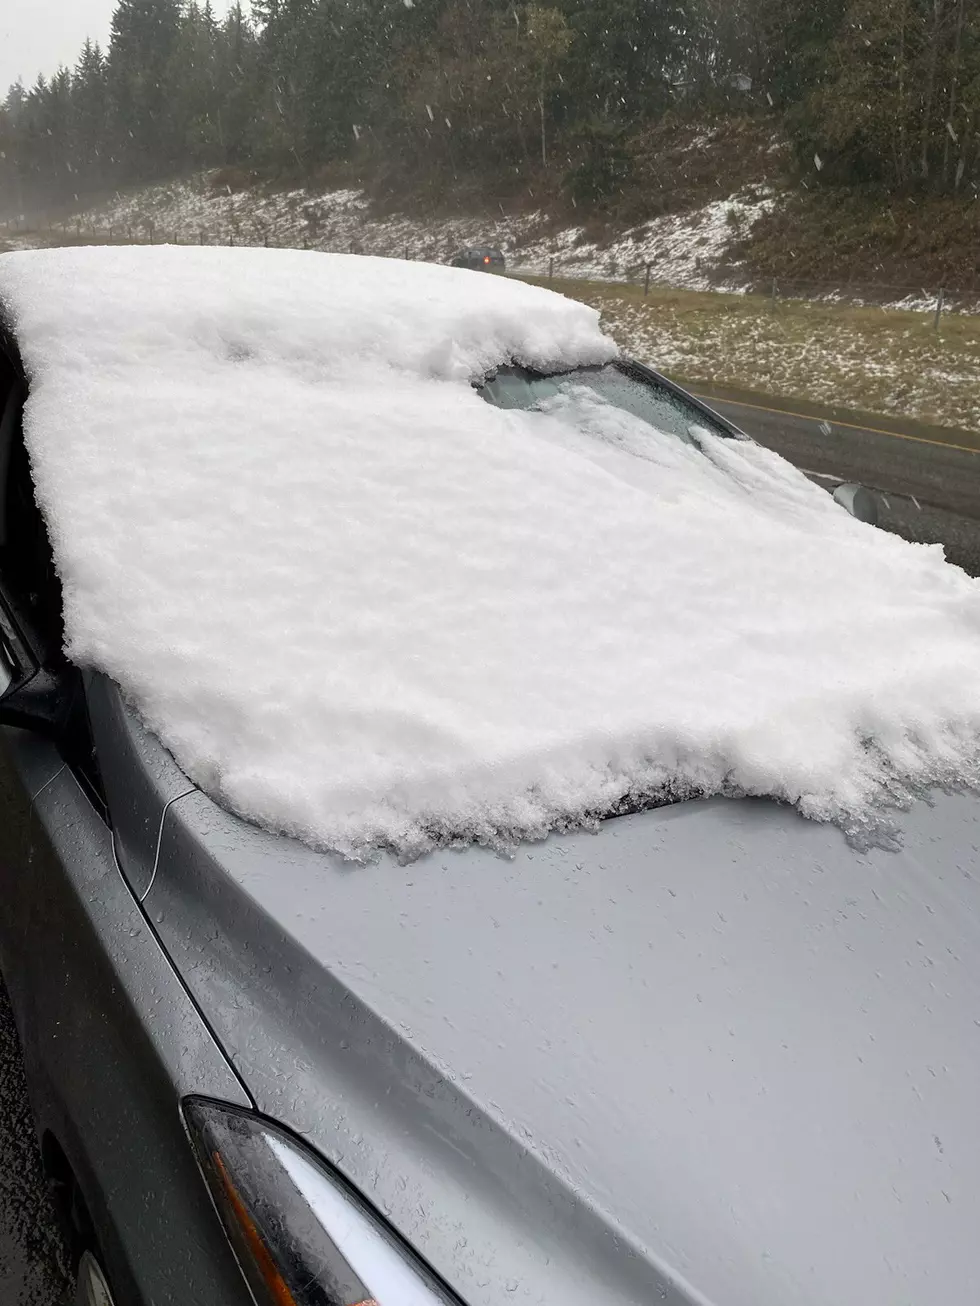 Driver Gets $500+ Ticket For Driving With Windshield Covered In Snow